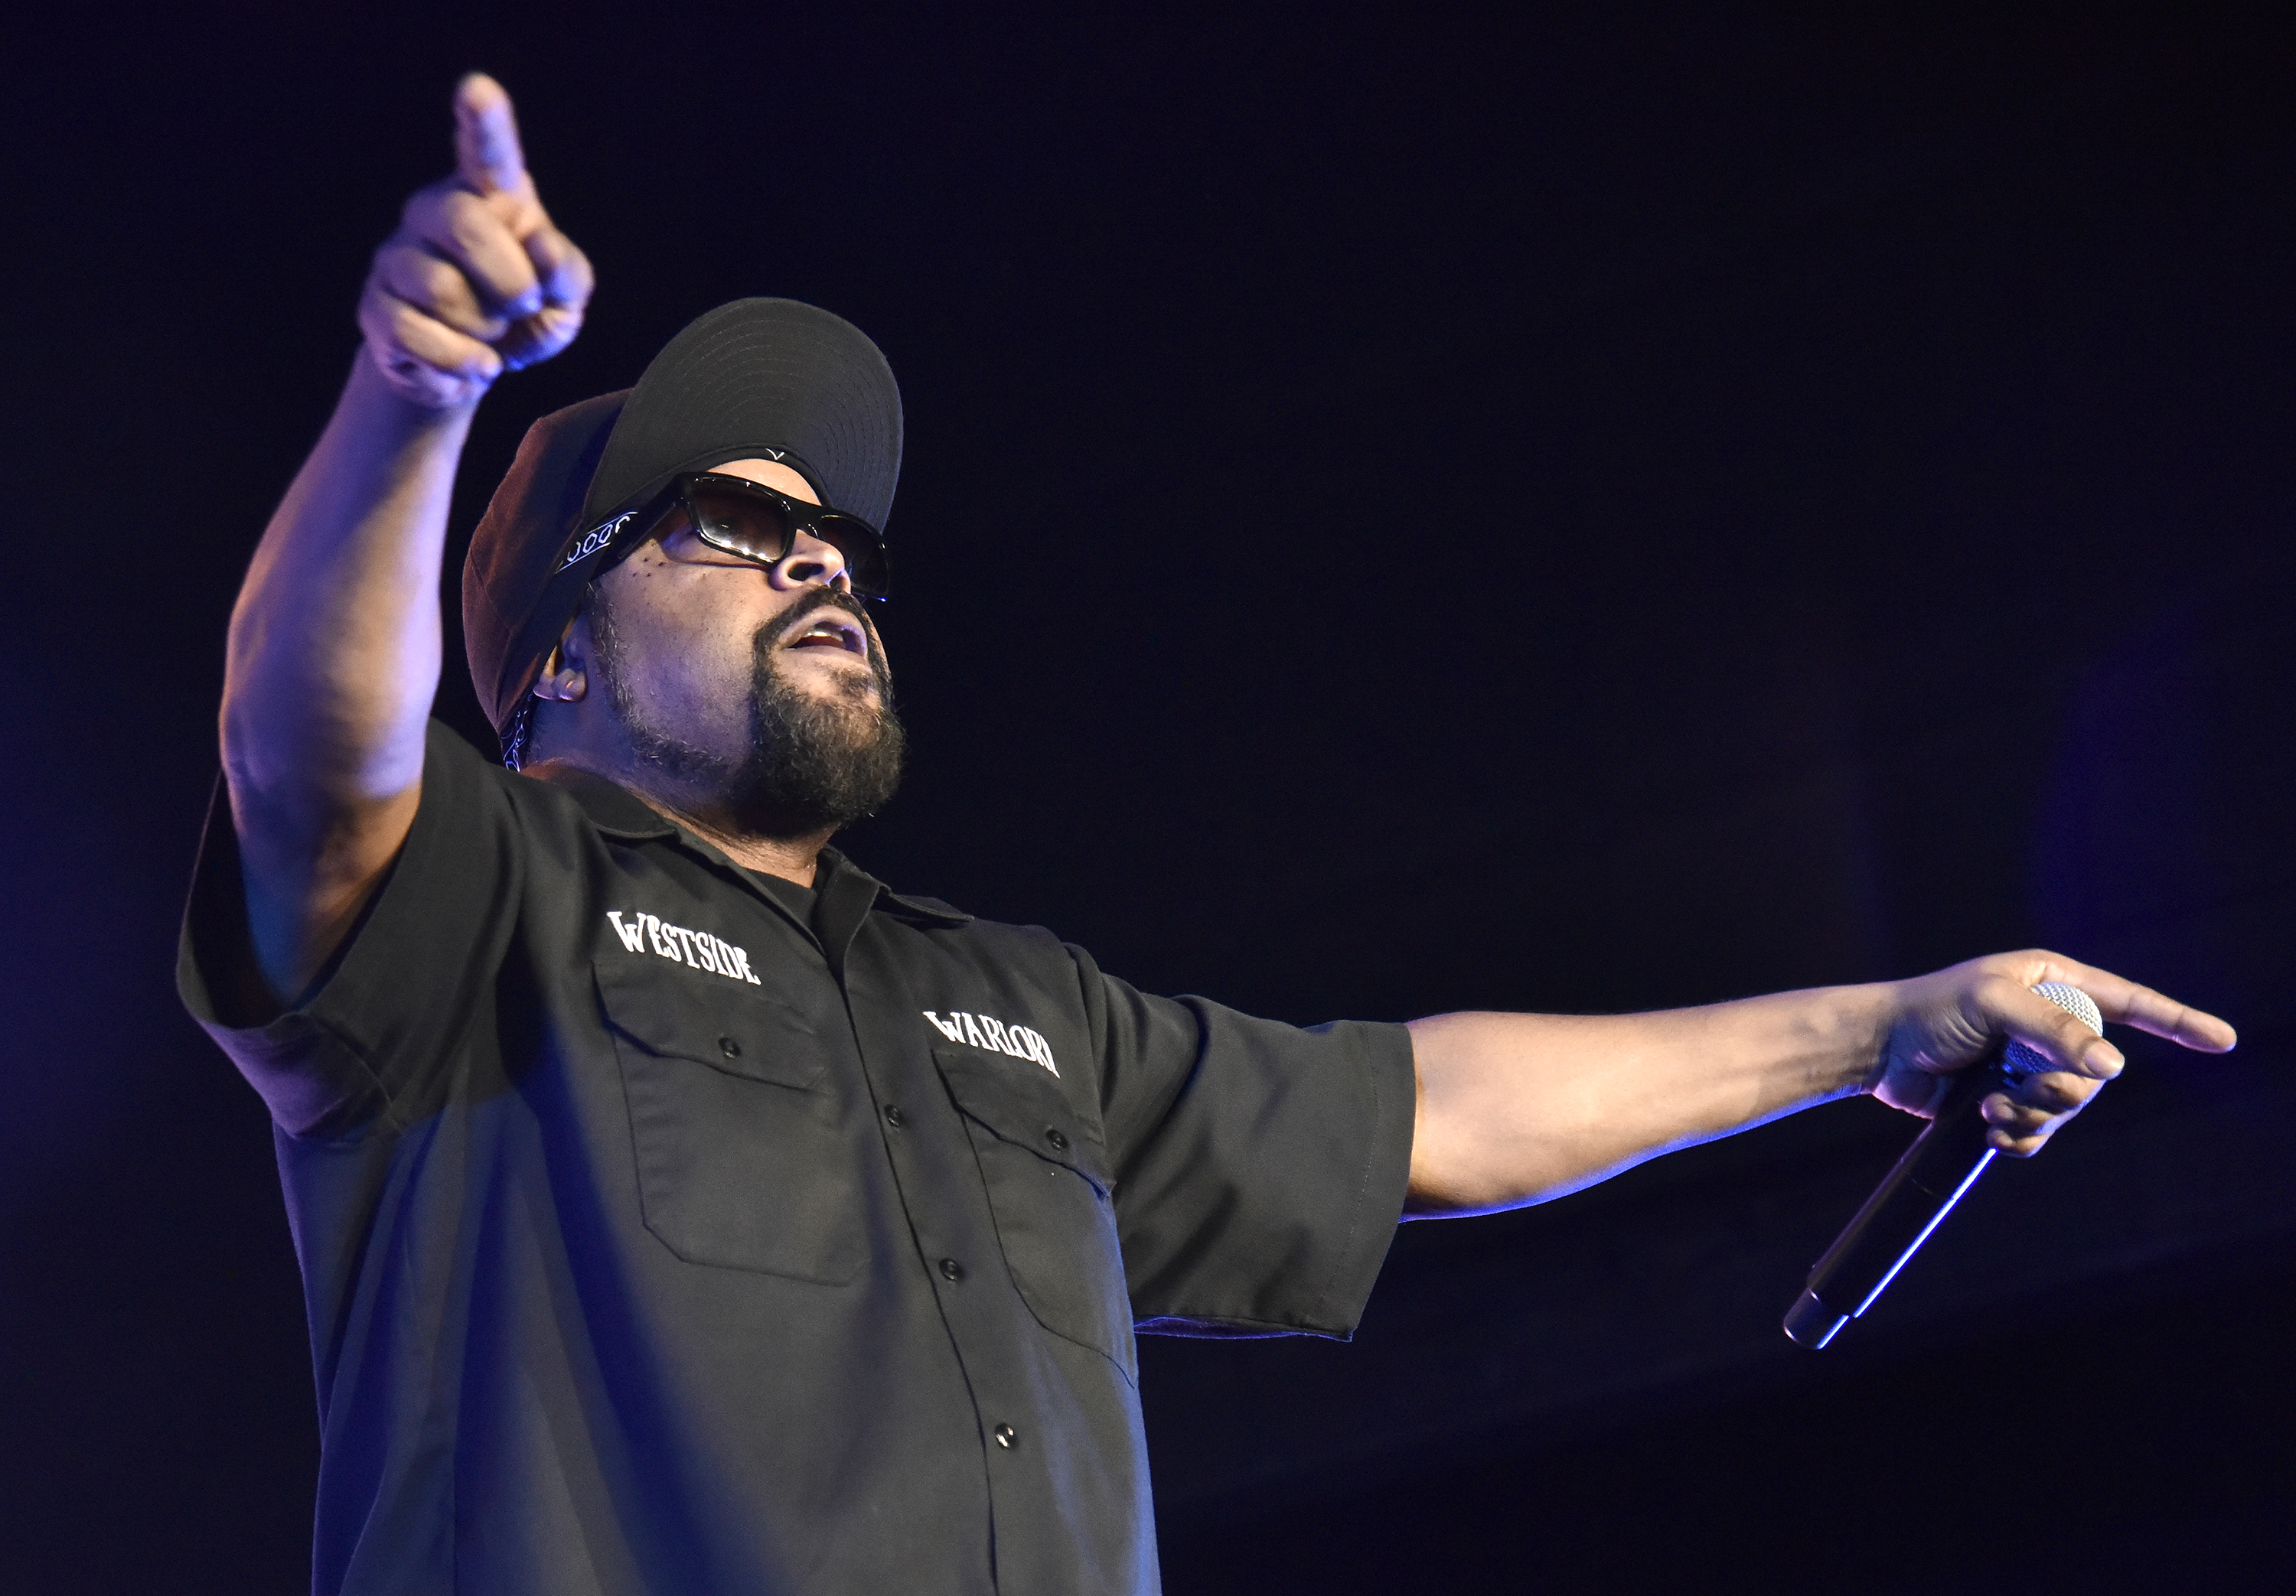 The inside story of how Ice Cube joined forces with Donald Trump - POLITICO